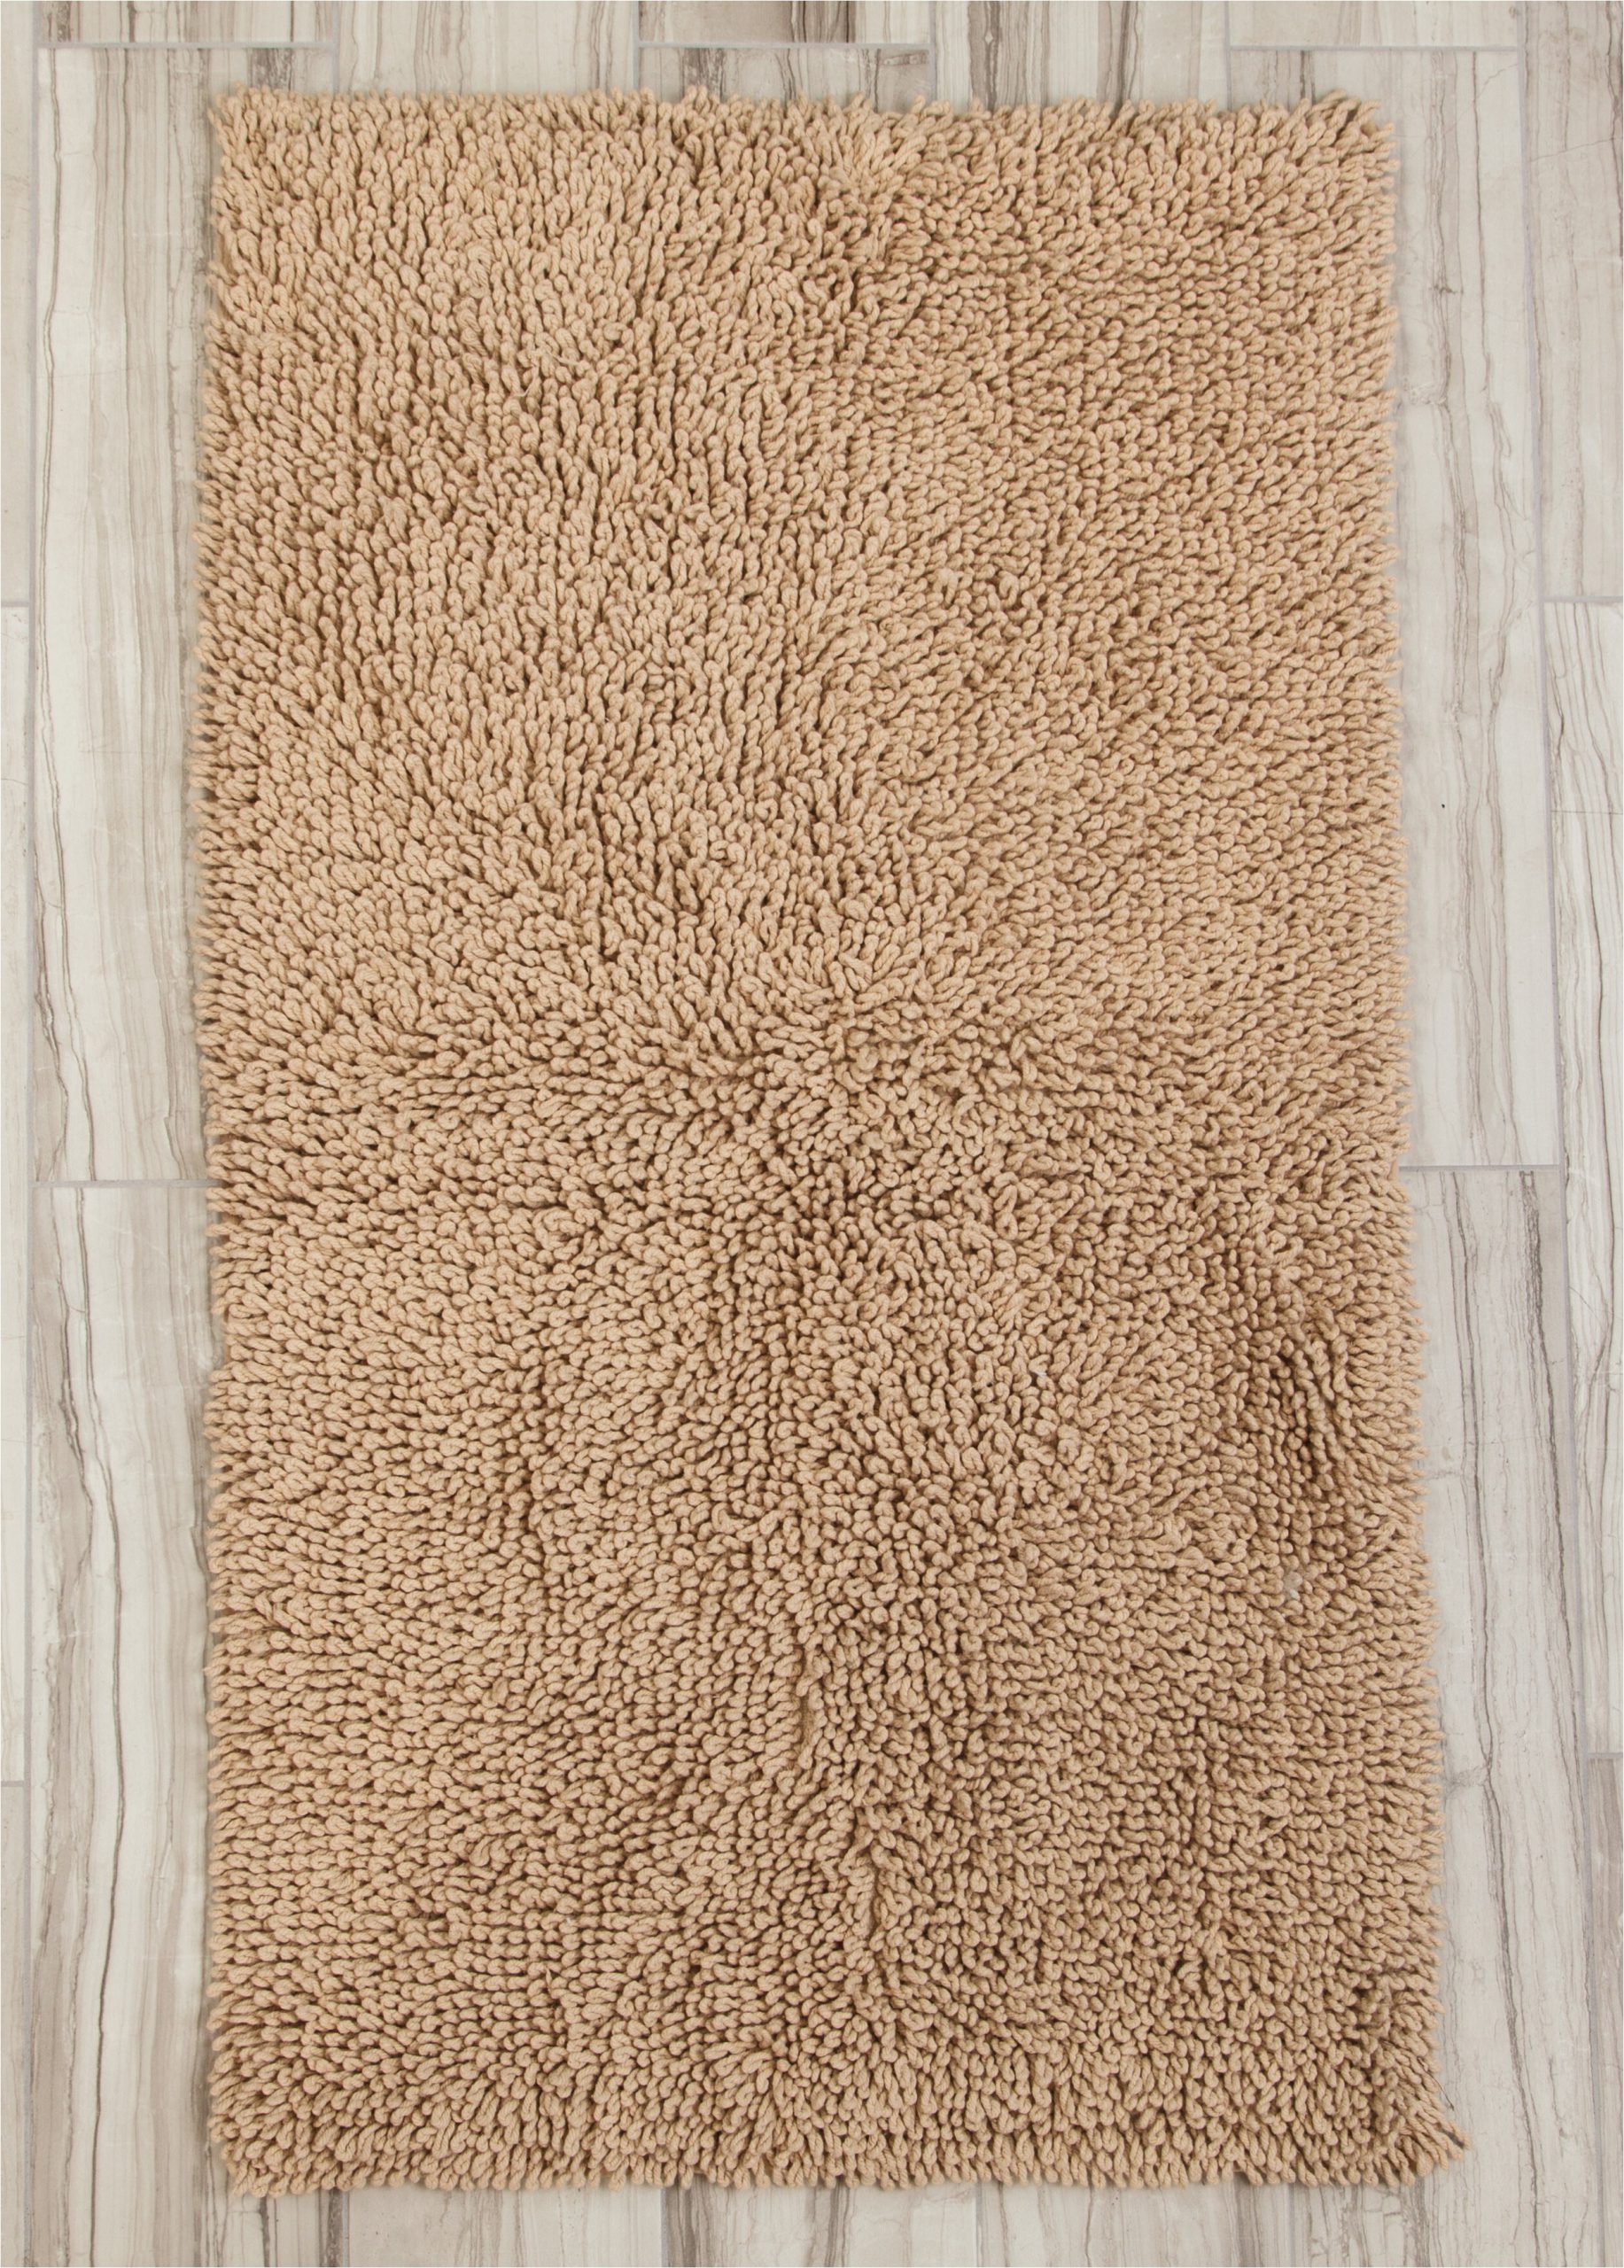 Bath Rugs without Latex Backing Eastcotts Spray Latex Back Rectangle Cotton Non Slip Bath Rug